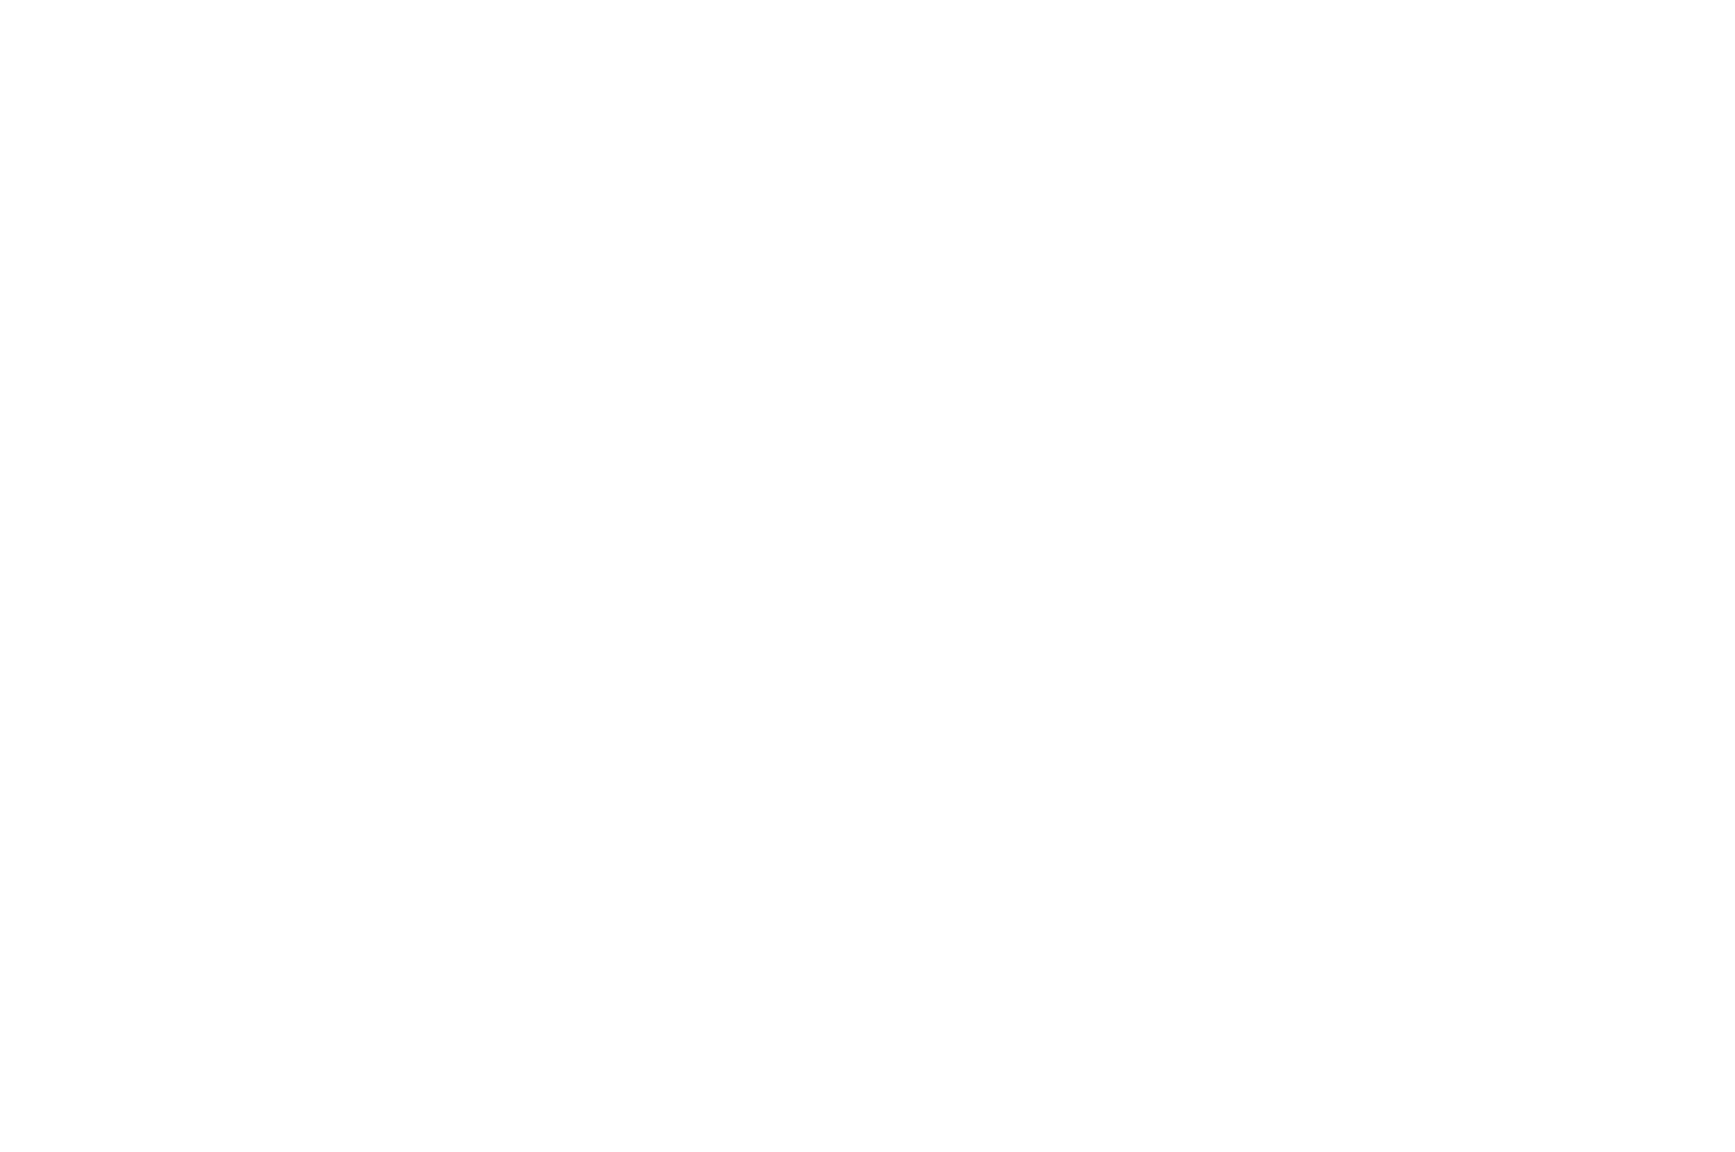 OFFICIAL SELECTION - Dark History and Horror Cons Screaming Mad Film Festival - 2022.png